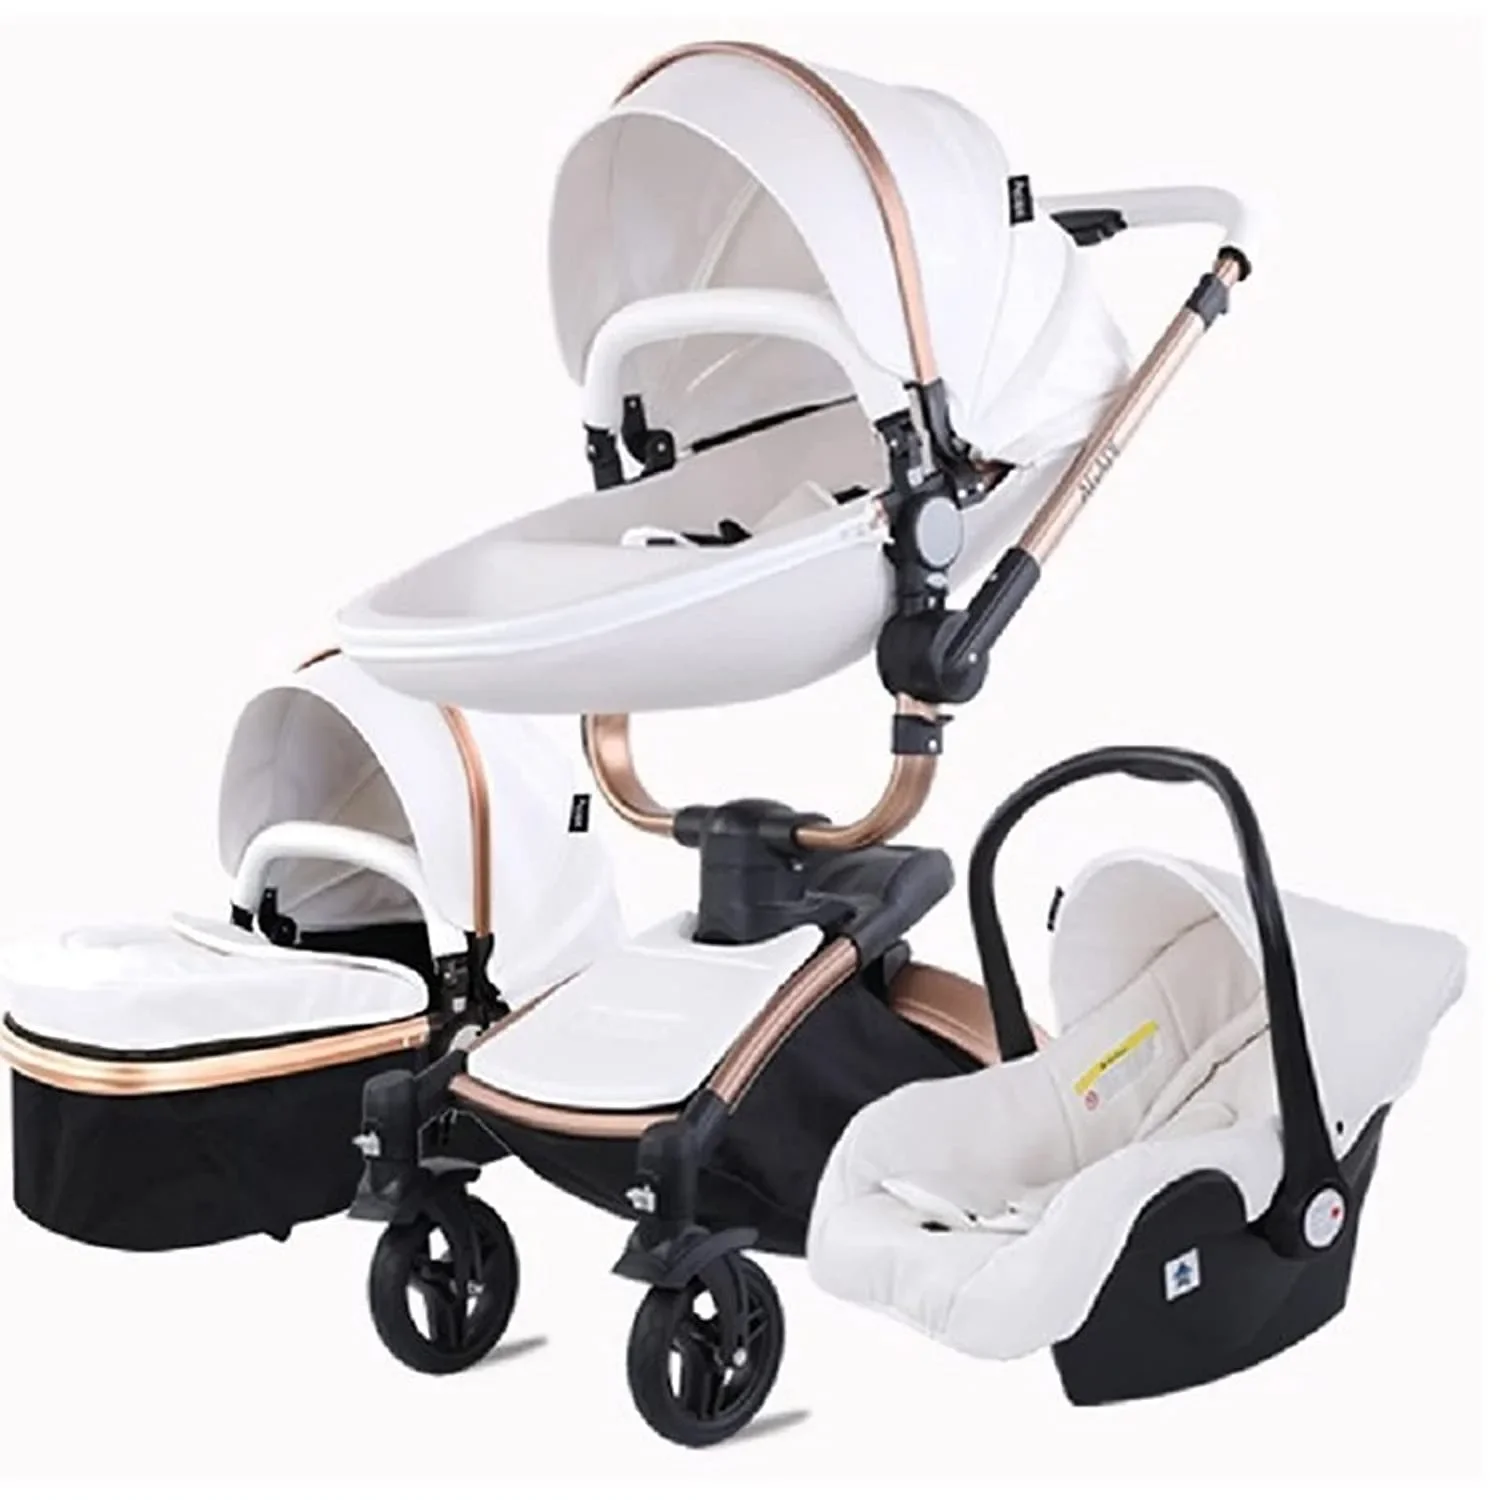 

New Design Pram Hot Sales Multi-Functional Carriage High Quality Pushchair Foldable Buggy Baby Stroller